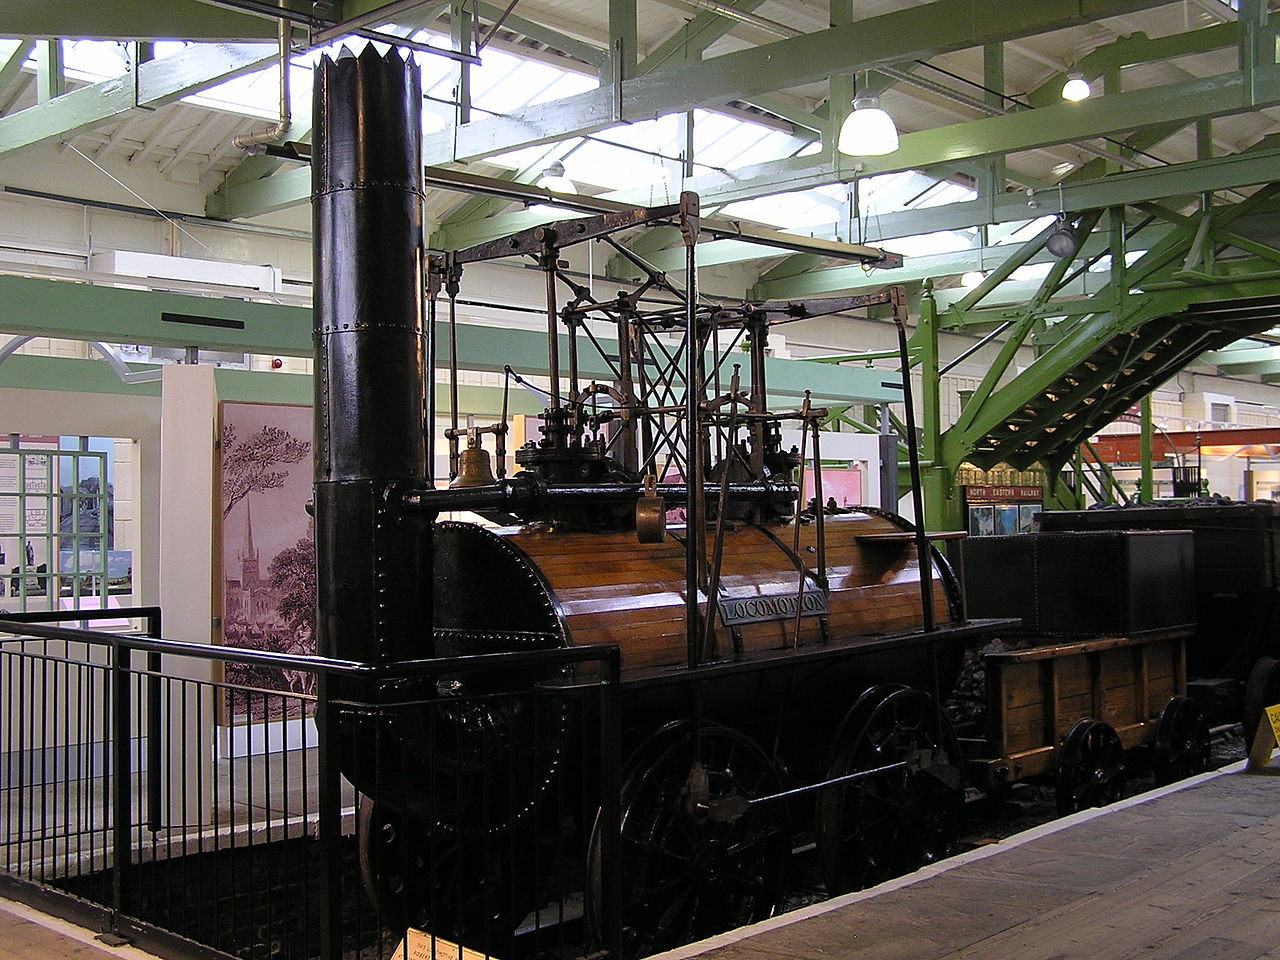 Locomotion No. 1, built in 1825 by George Stephenson for the Stockton and Darlington Railway, hauled the first train on the line on 27 September 1825. On display at Darlington Bank Top station. Credits: Gillett's Crossing from Bristol, United Kingdom. 